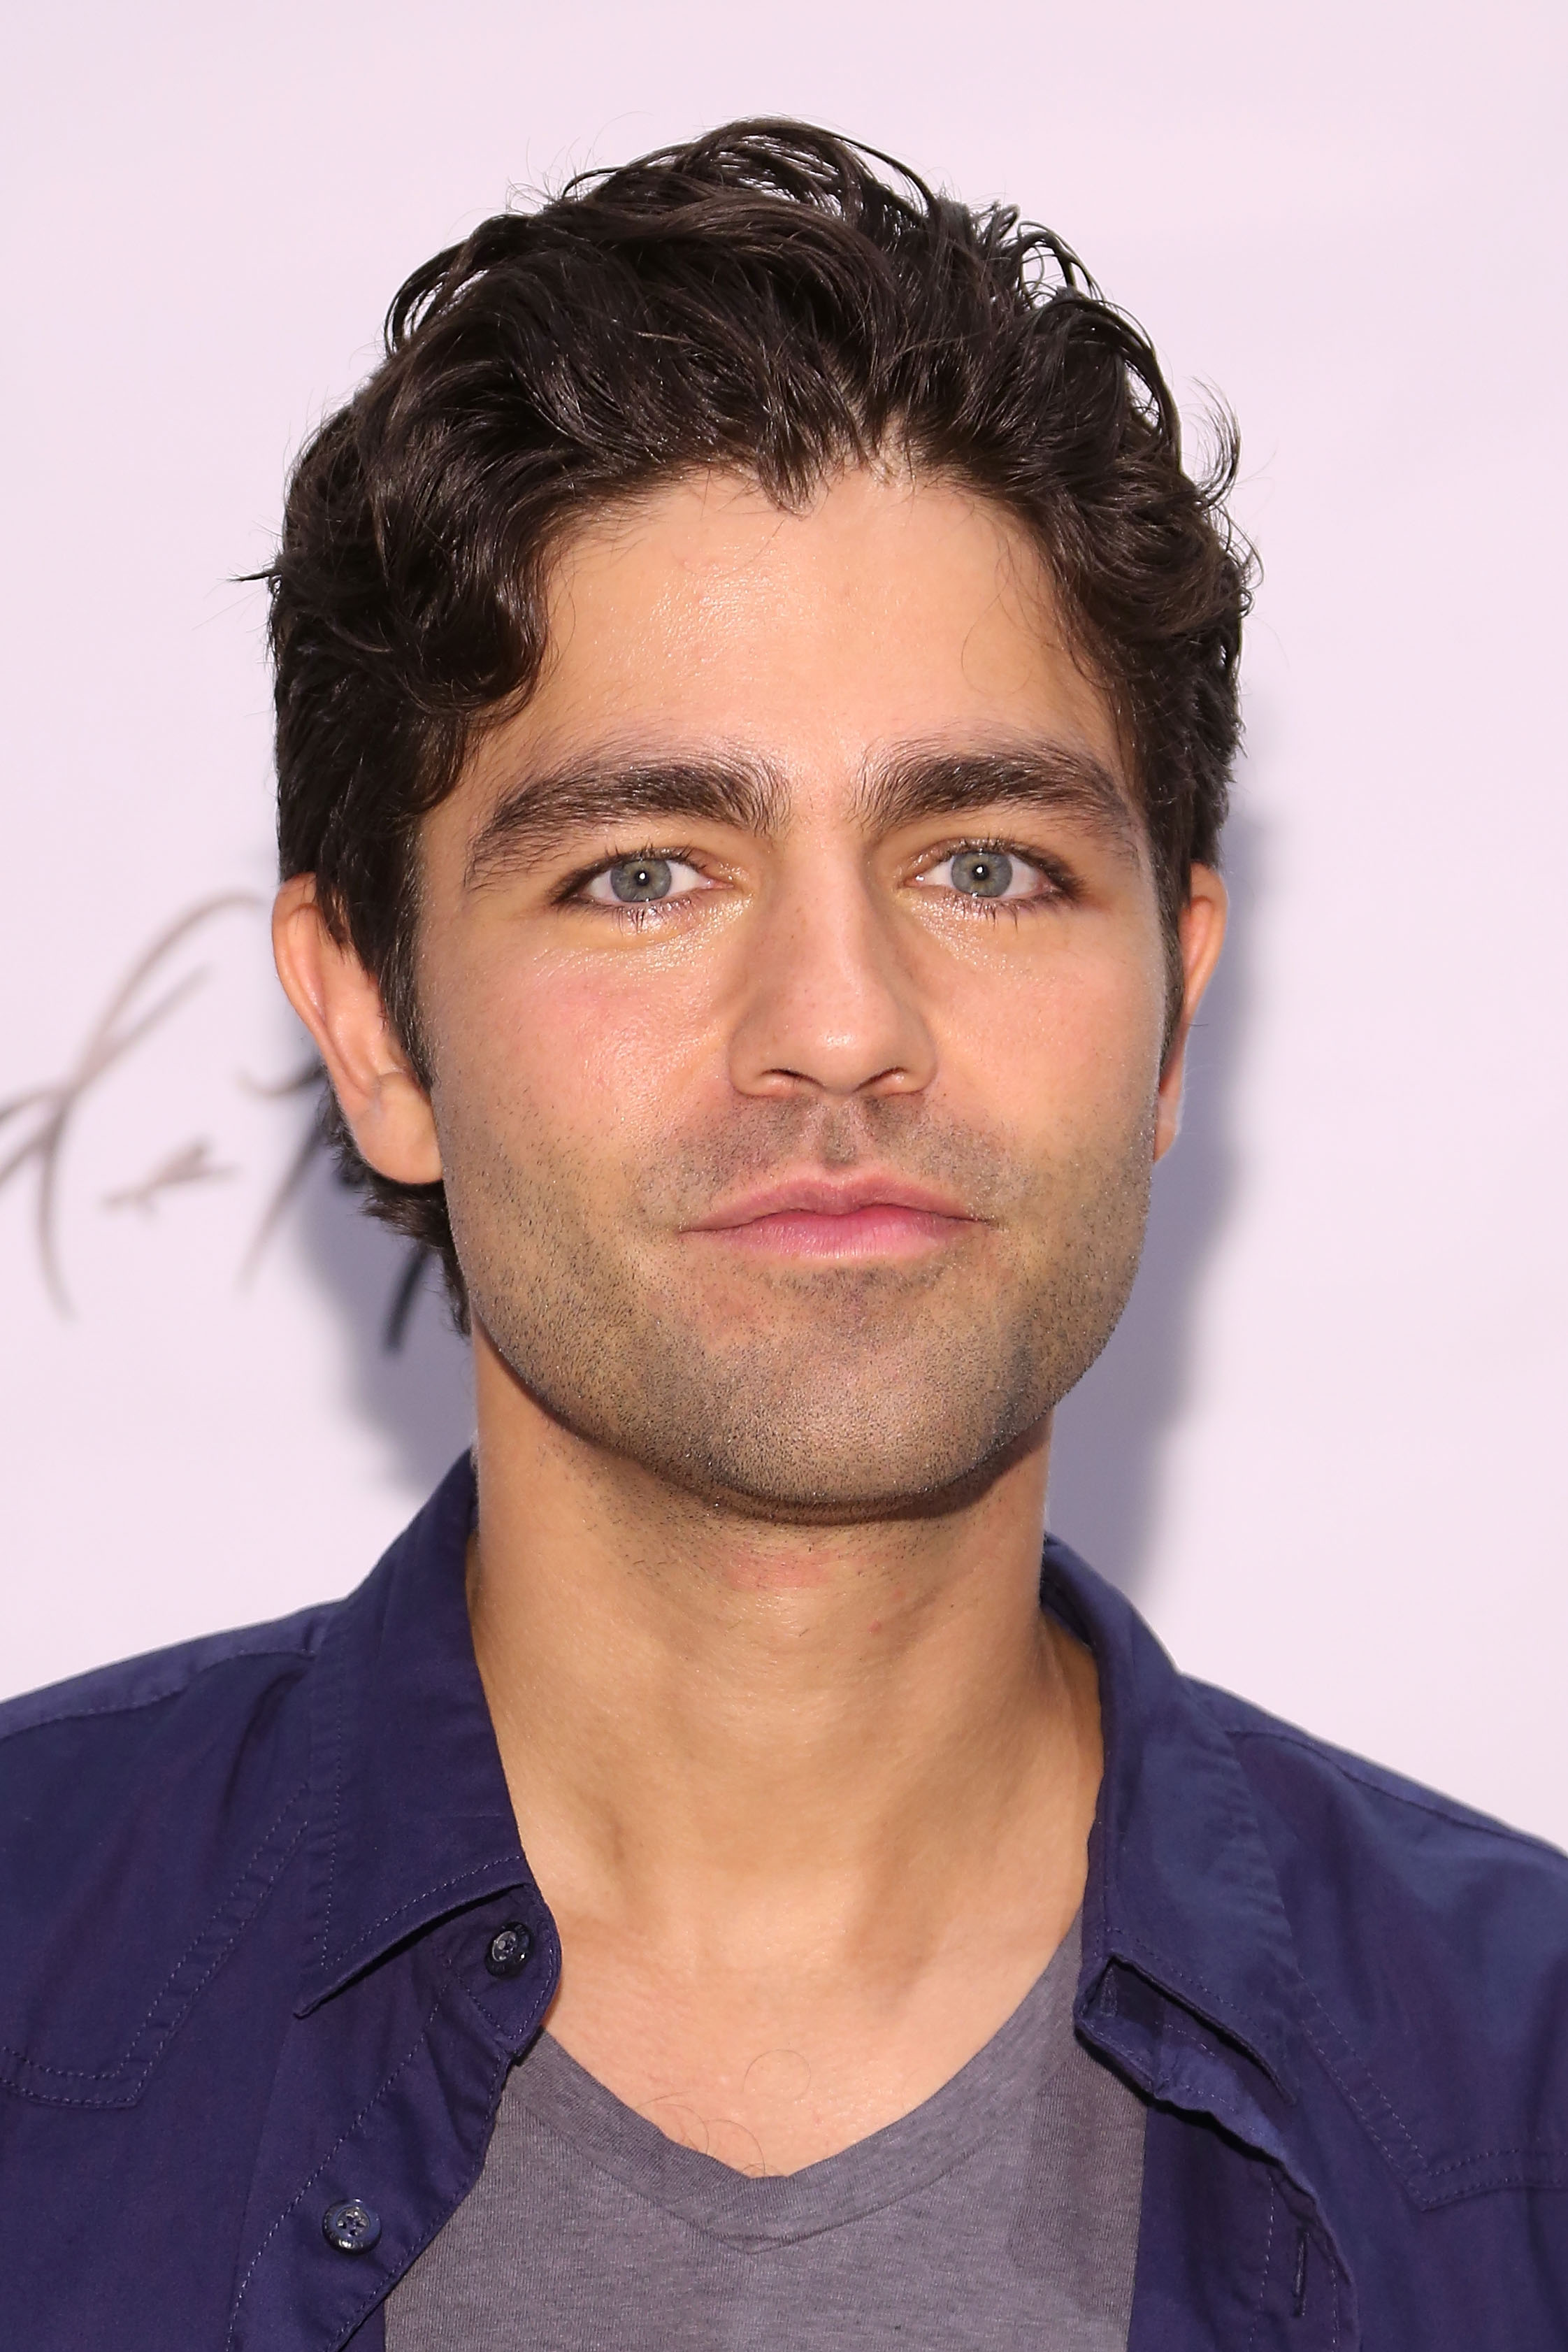 Actor Adrian Grenier at Lord & Taylor on May 11, 2015 in New York City. (Taylor Hill—etty Images)